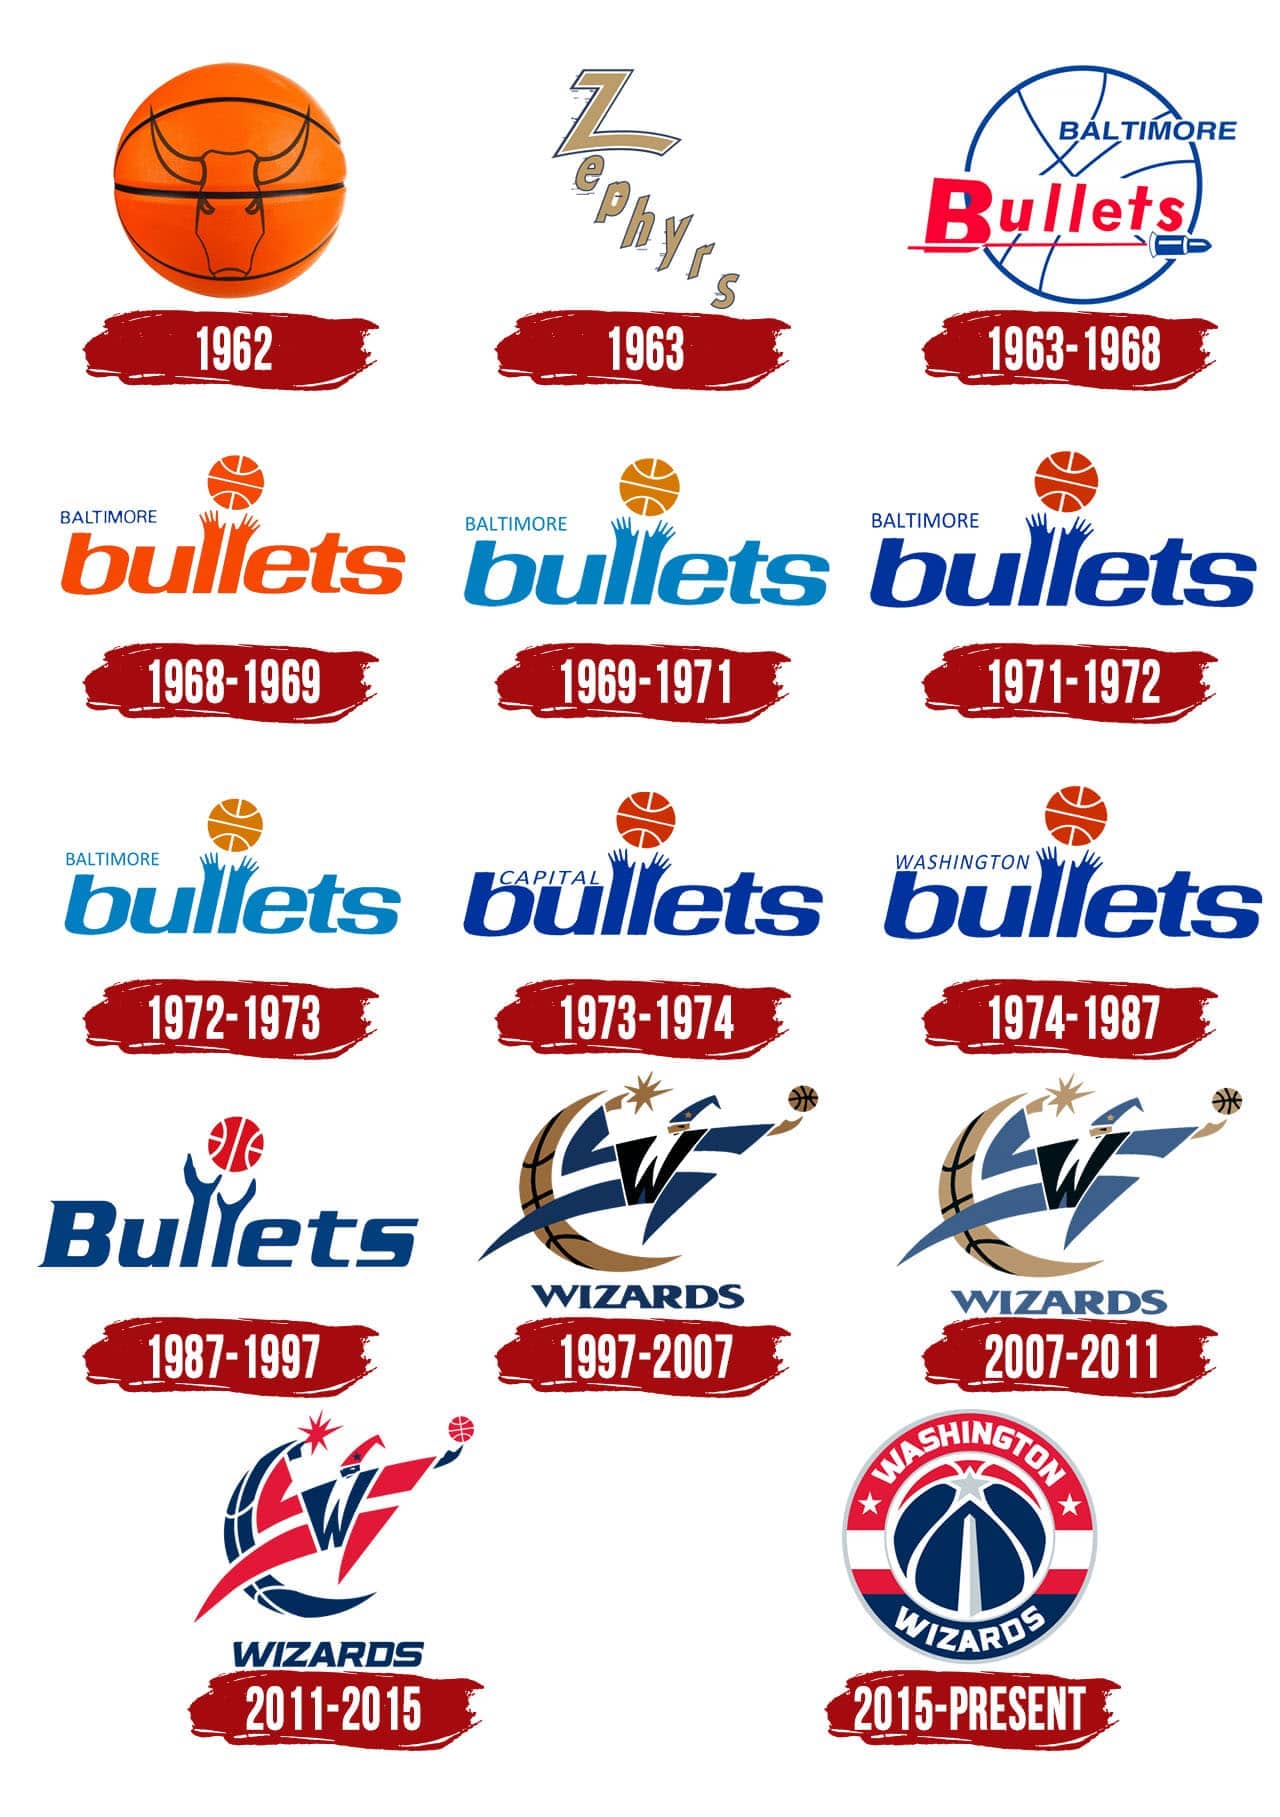 Washington Wizards Logo The Most Famous Brands And Company Logos In The World